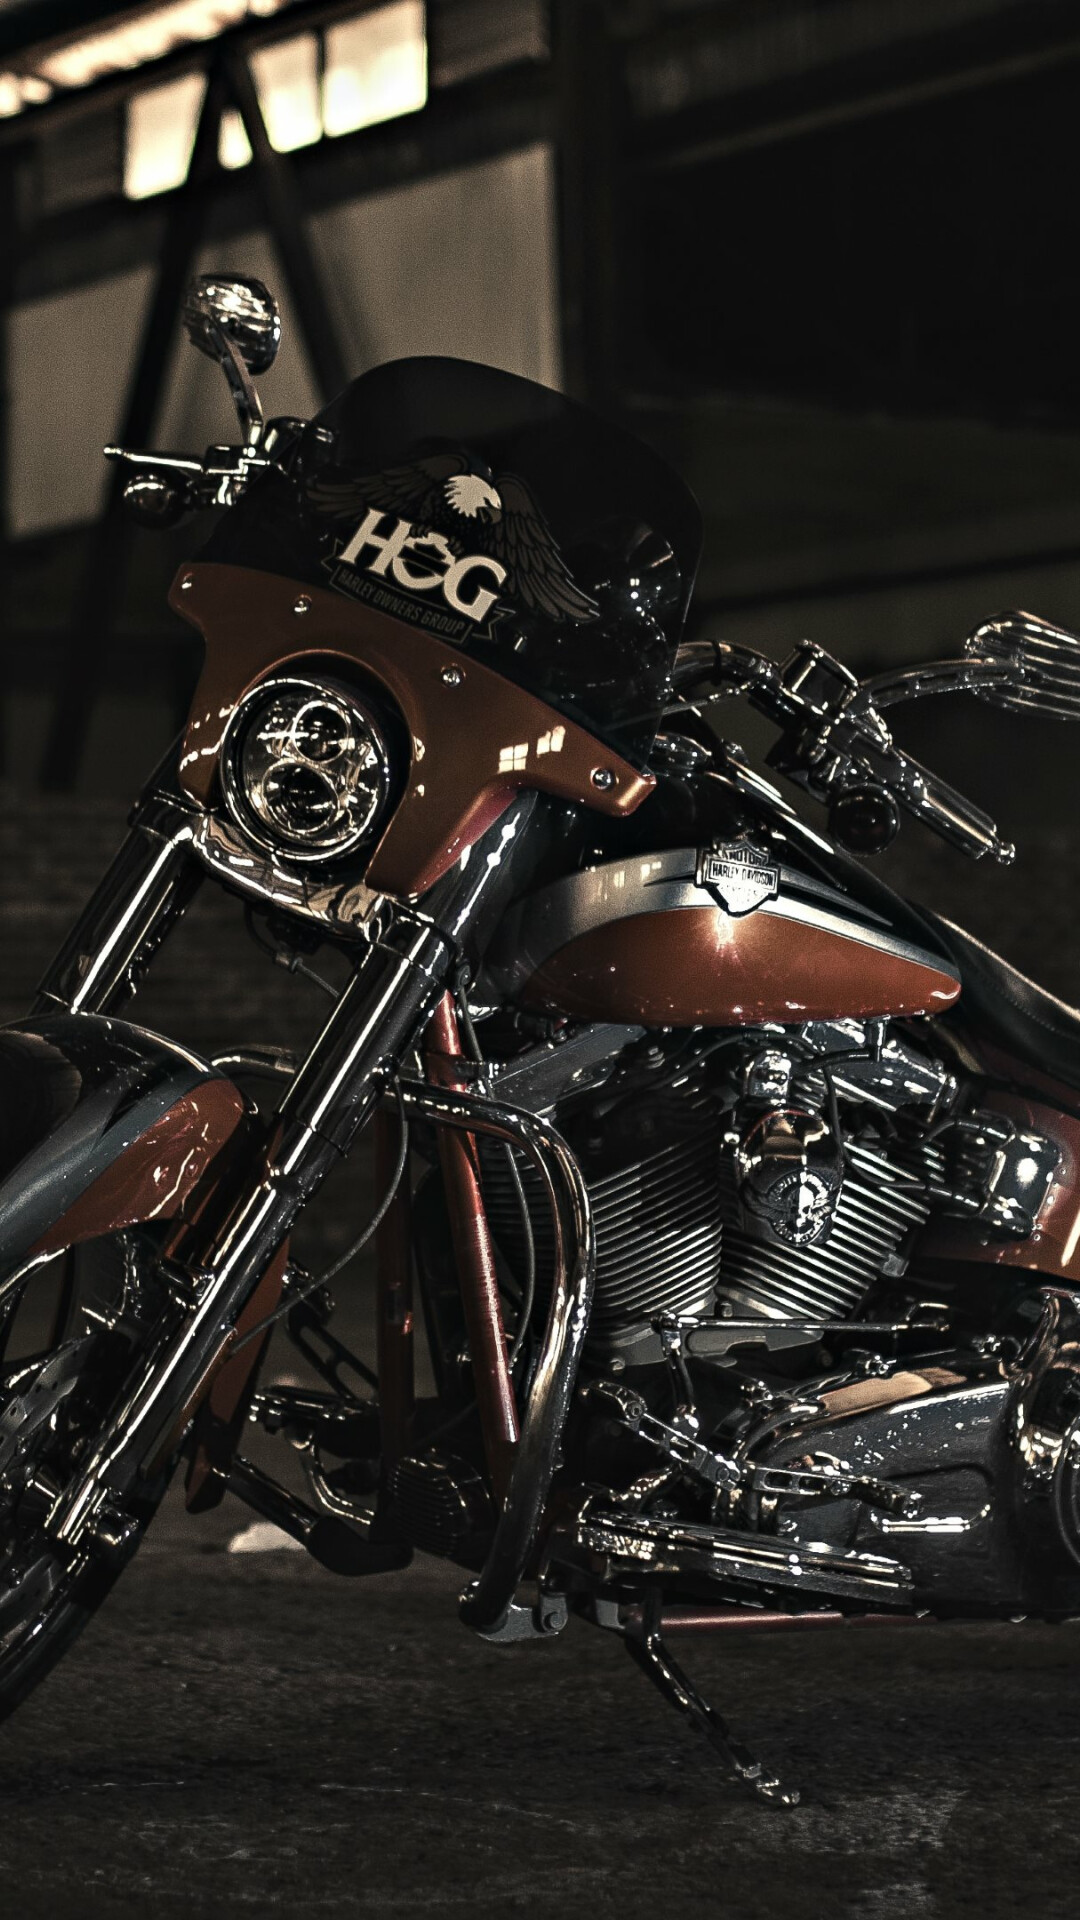 Harley-Davidson: One of two major American motorcycle manufacturers, founded in 1903. 1080x1920 Full HD Wallpaper.